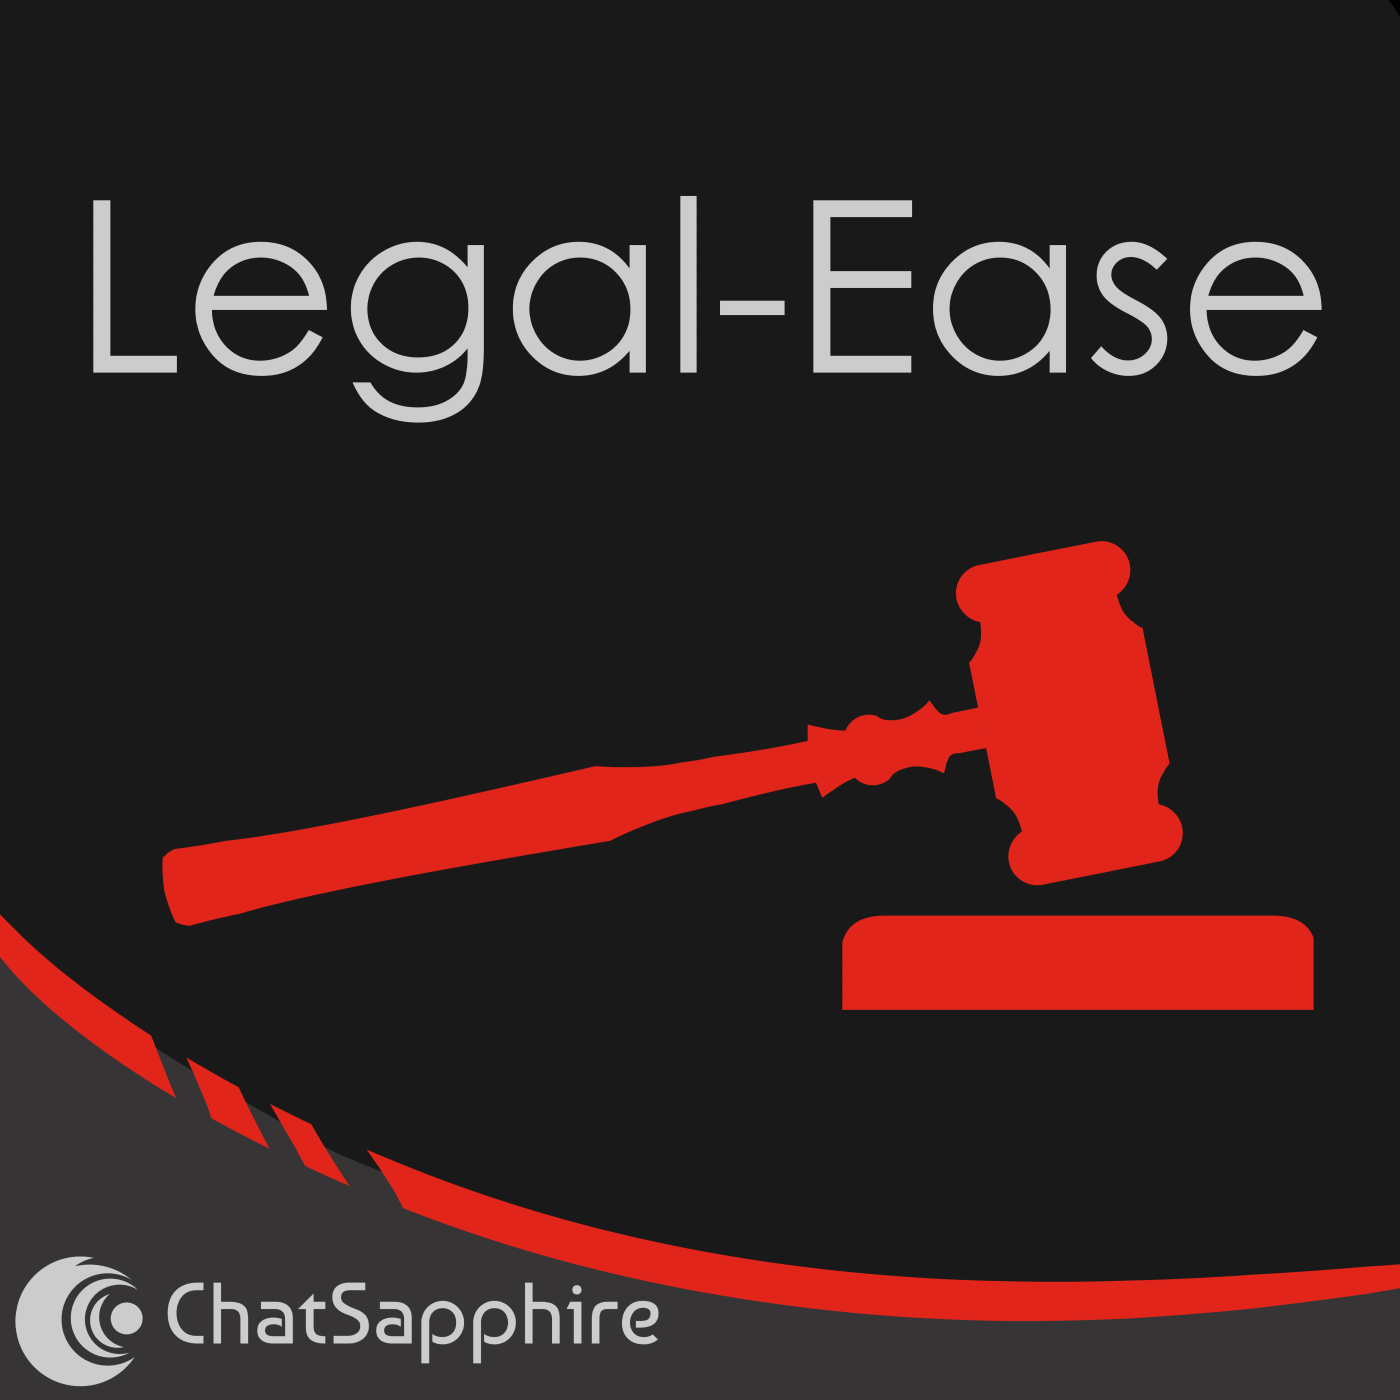 Artwork for podcast Legal-Ease by ChatSapphire